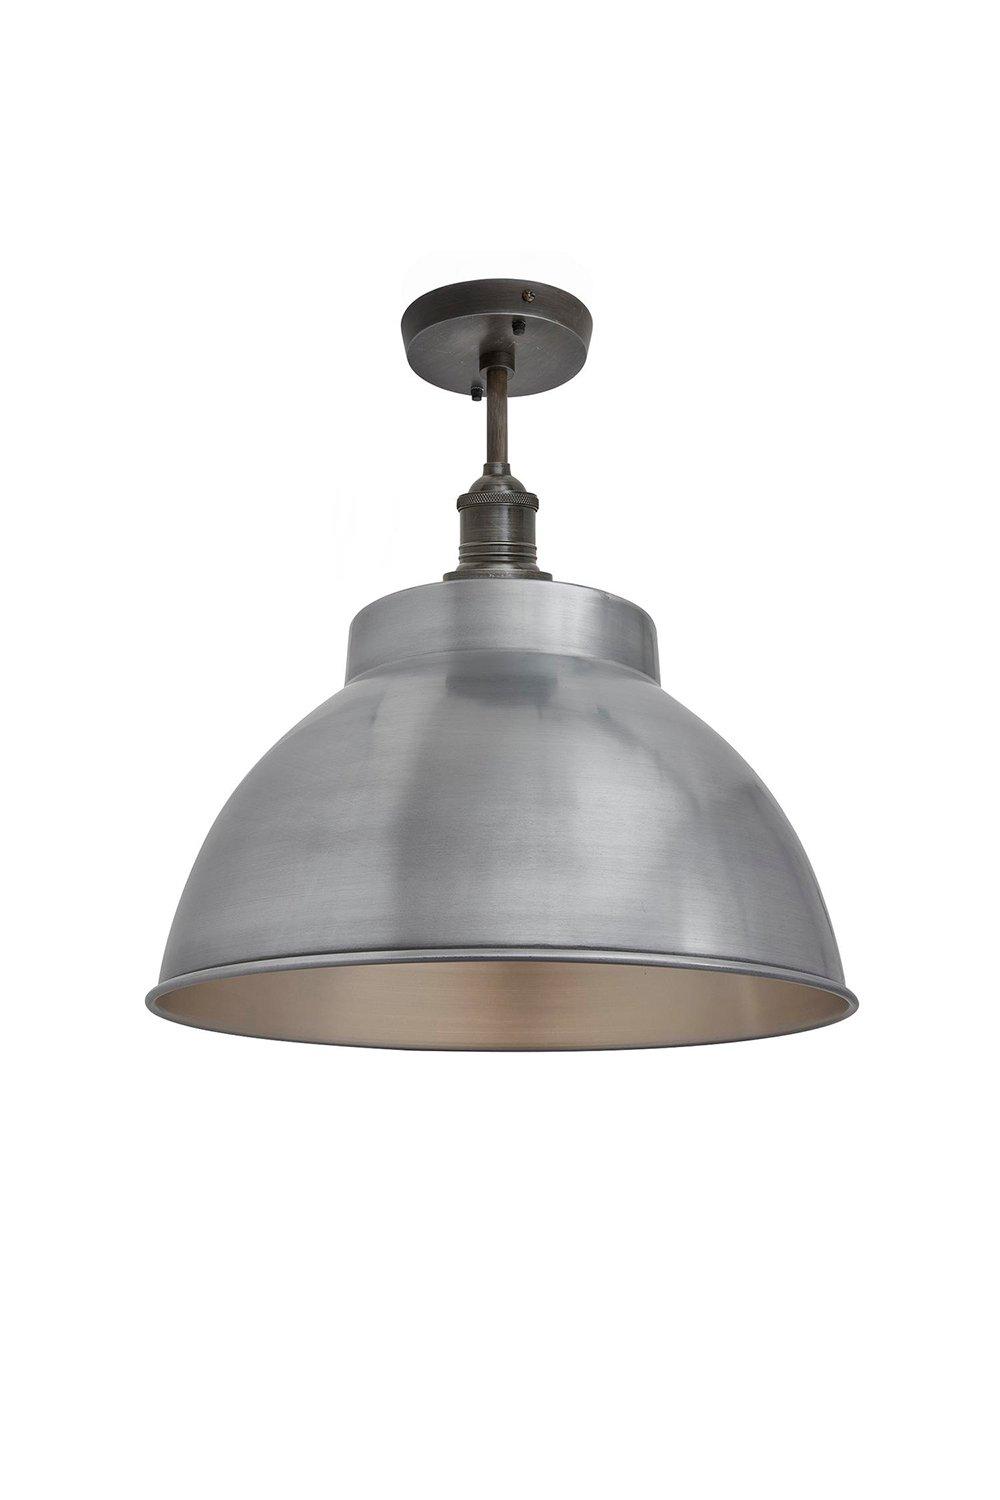 Brooklyn Dome Flush Mount, 13 Inch, Light Pewter, Pewter Holder